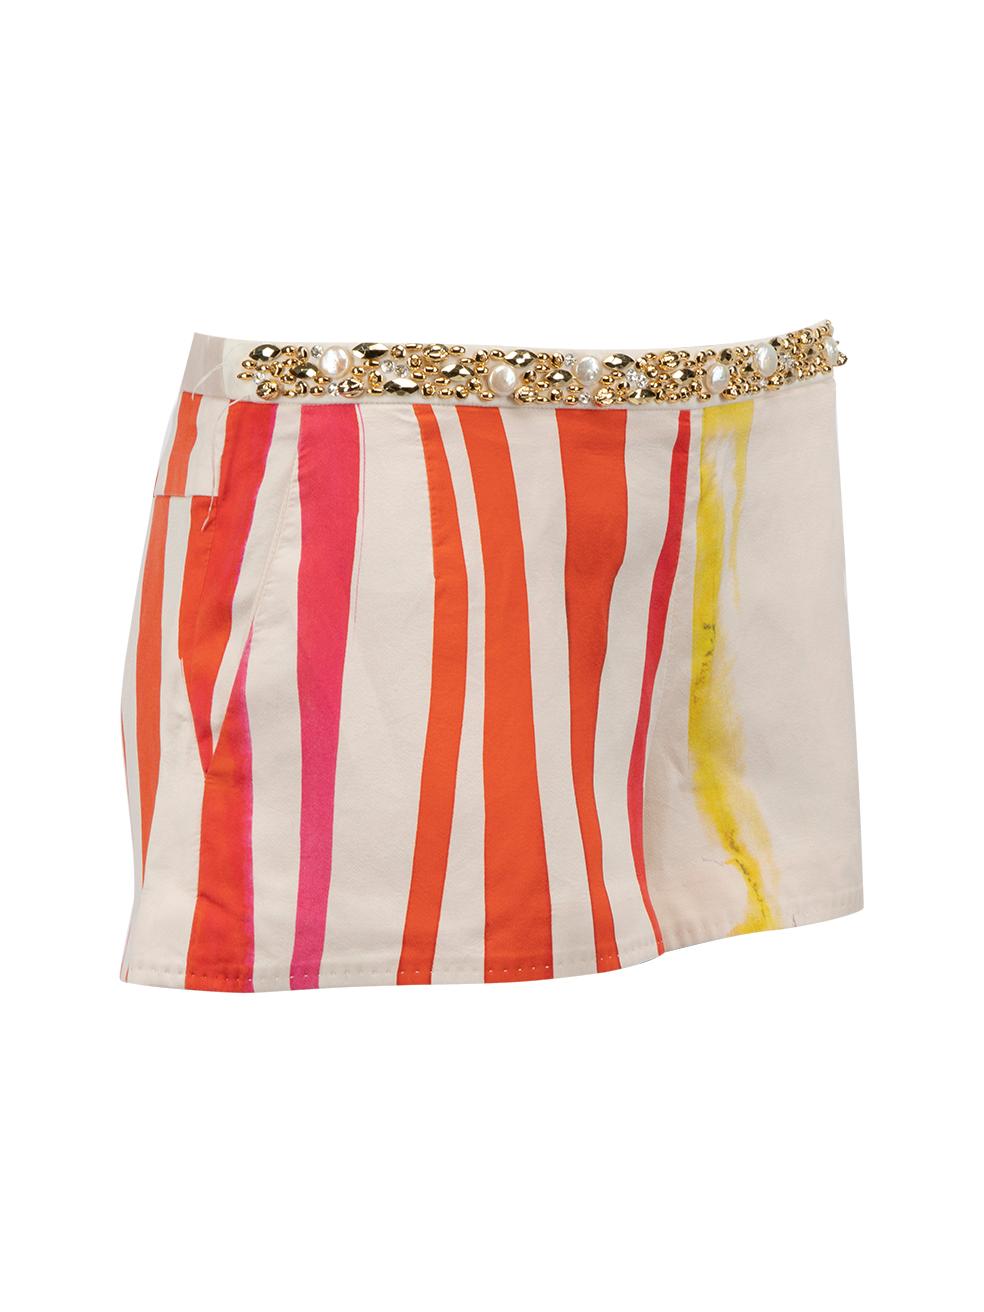 CONDITION is Very good. Minimal wear to shorts is evident. Minimal loose threads on the beaded embroidery can be seen on this used Louis Vuitton designer resale item. Details Cream , red and yellow Silk Shorts Short length Low waisted Red stripes